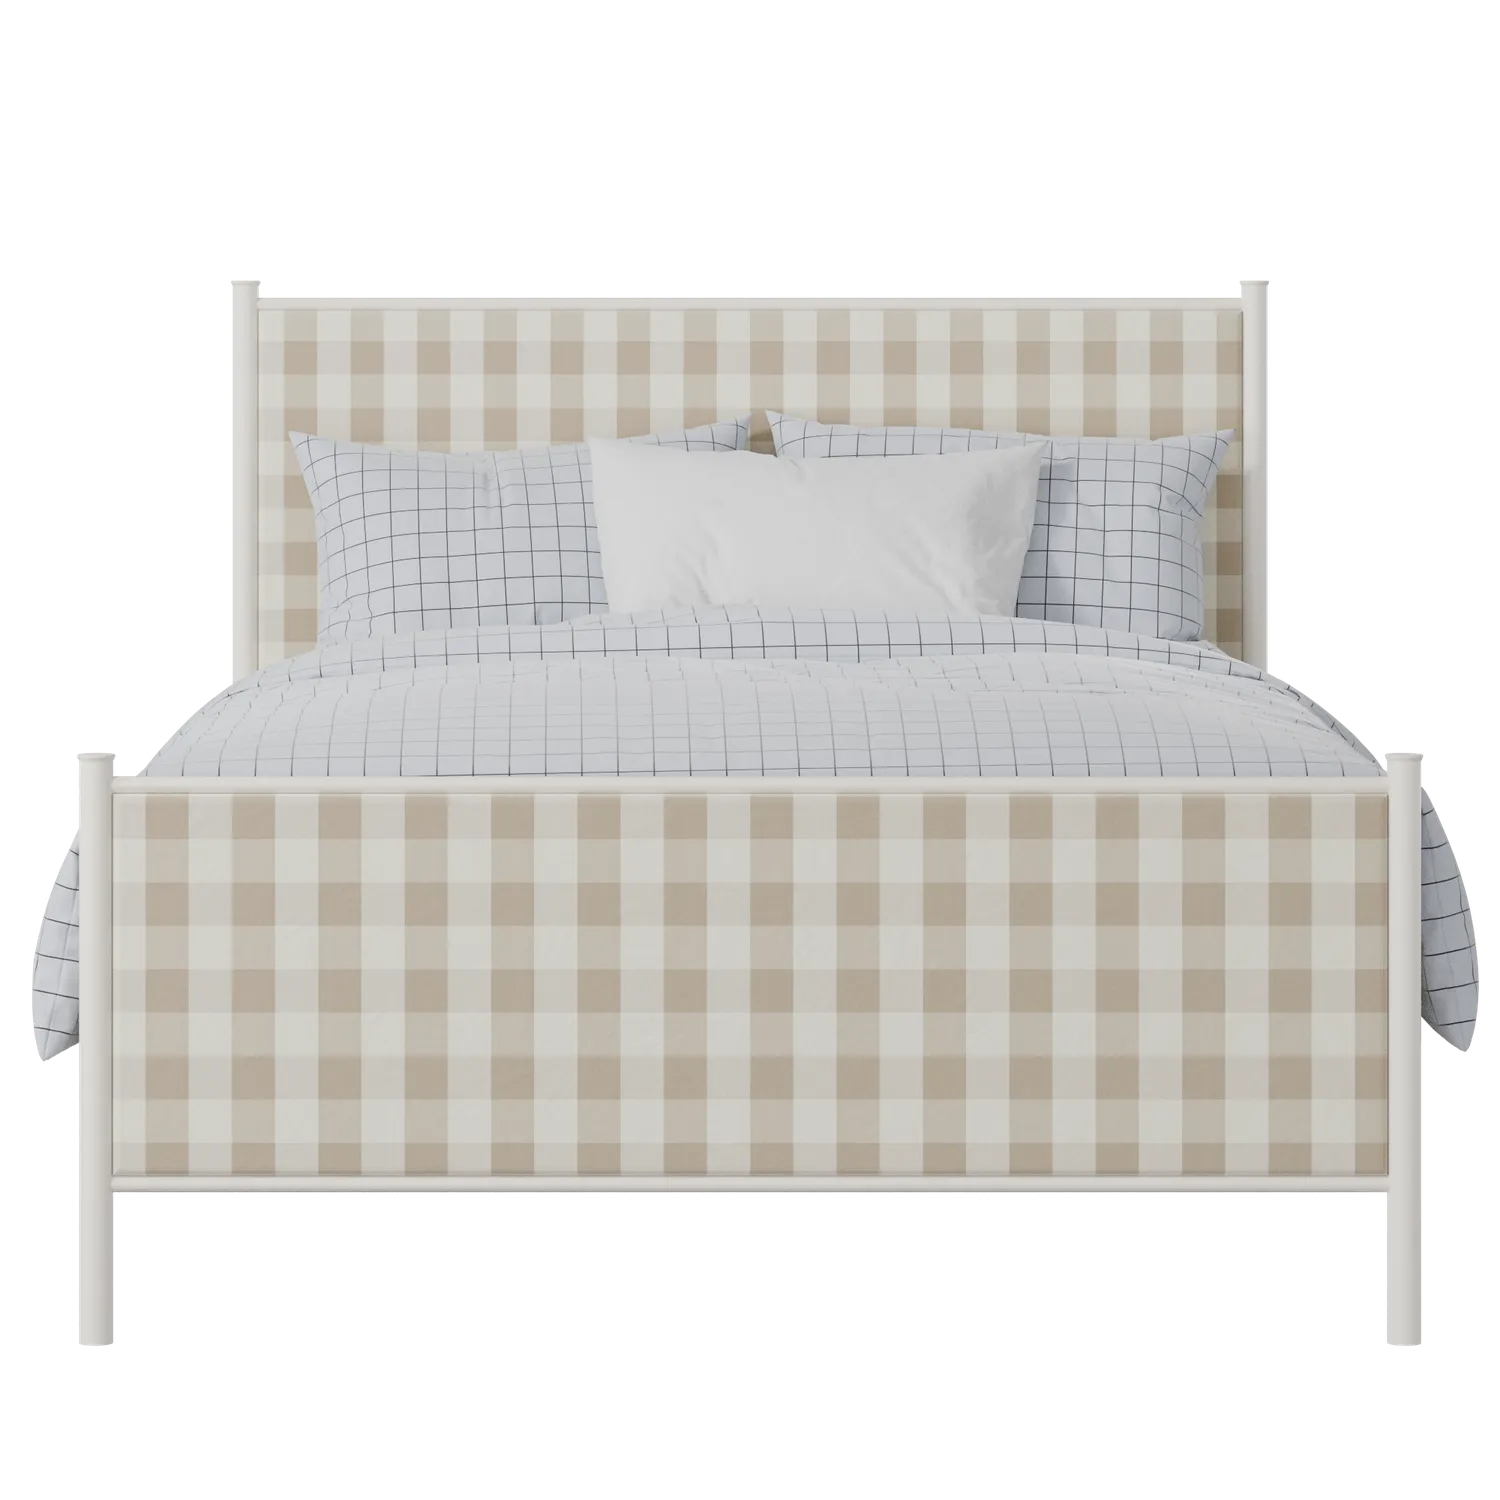 Brest iron/metal upholstered bed in ivory with grey fabric